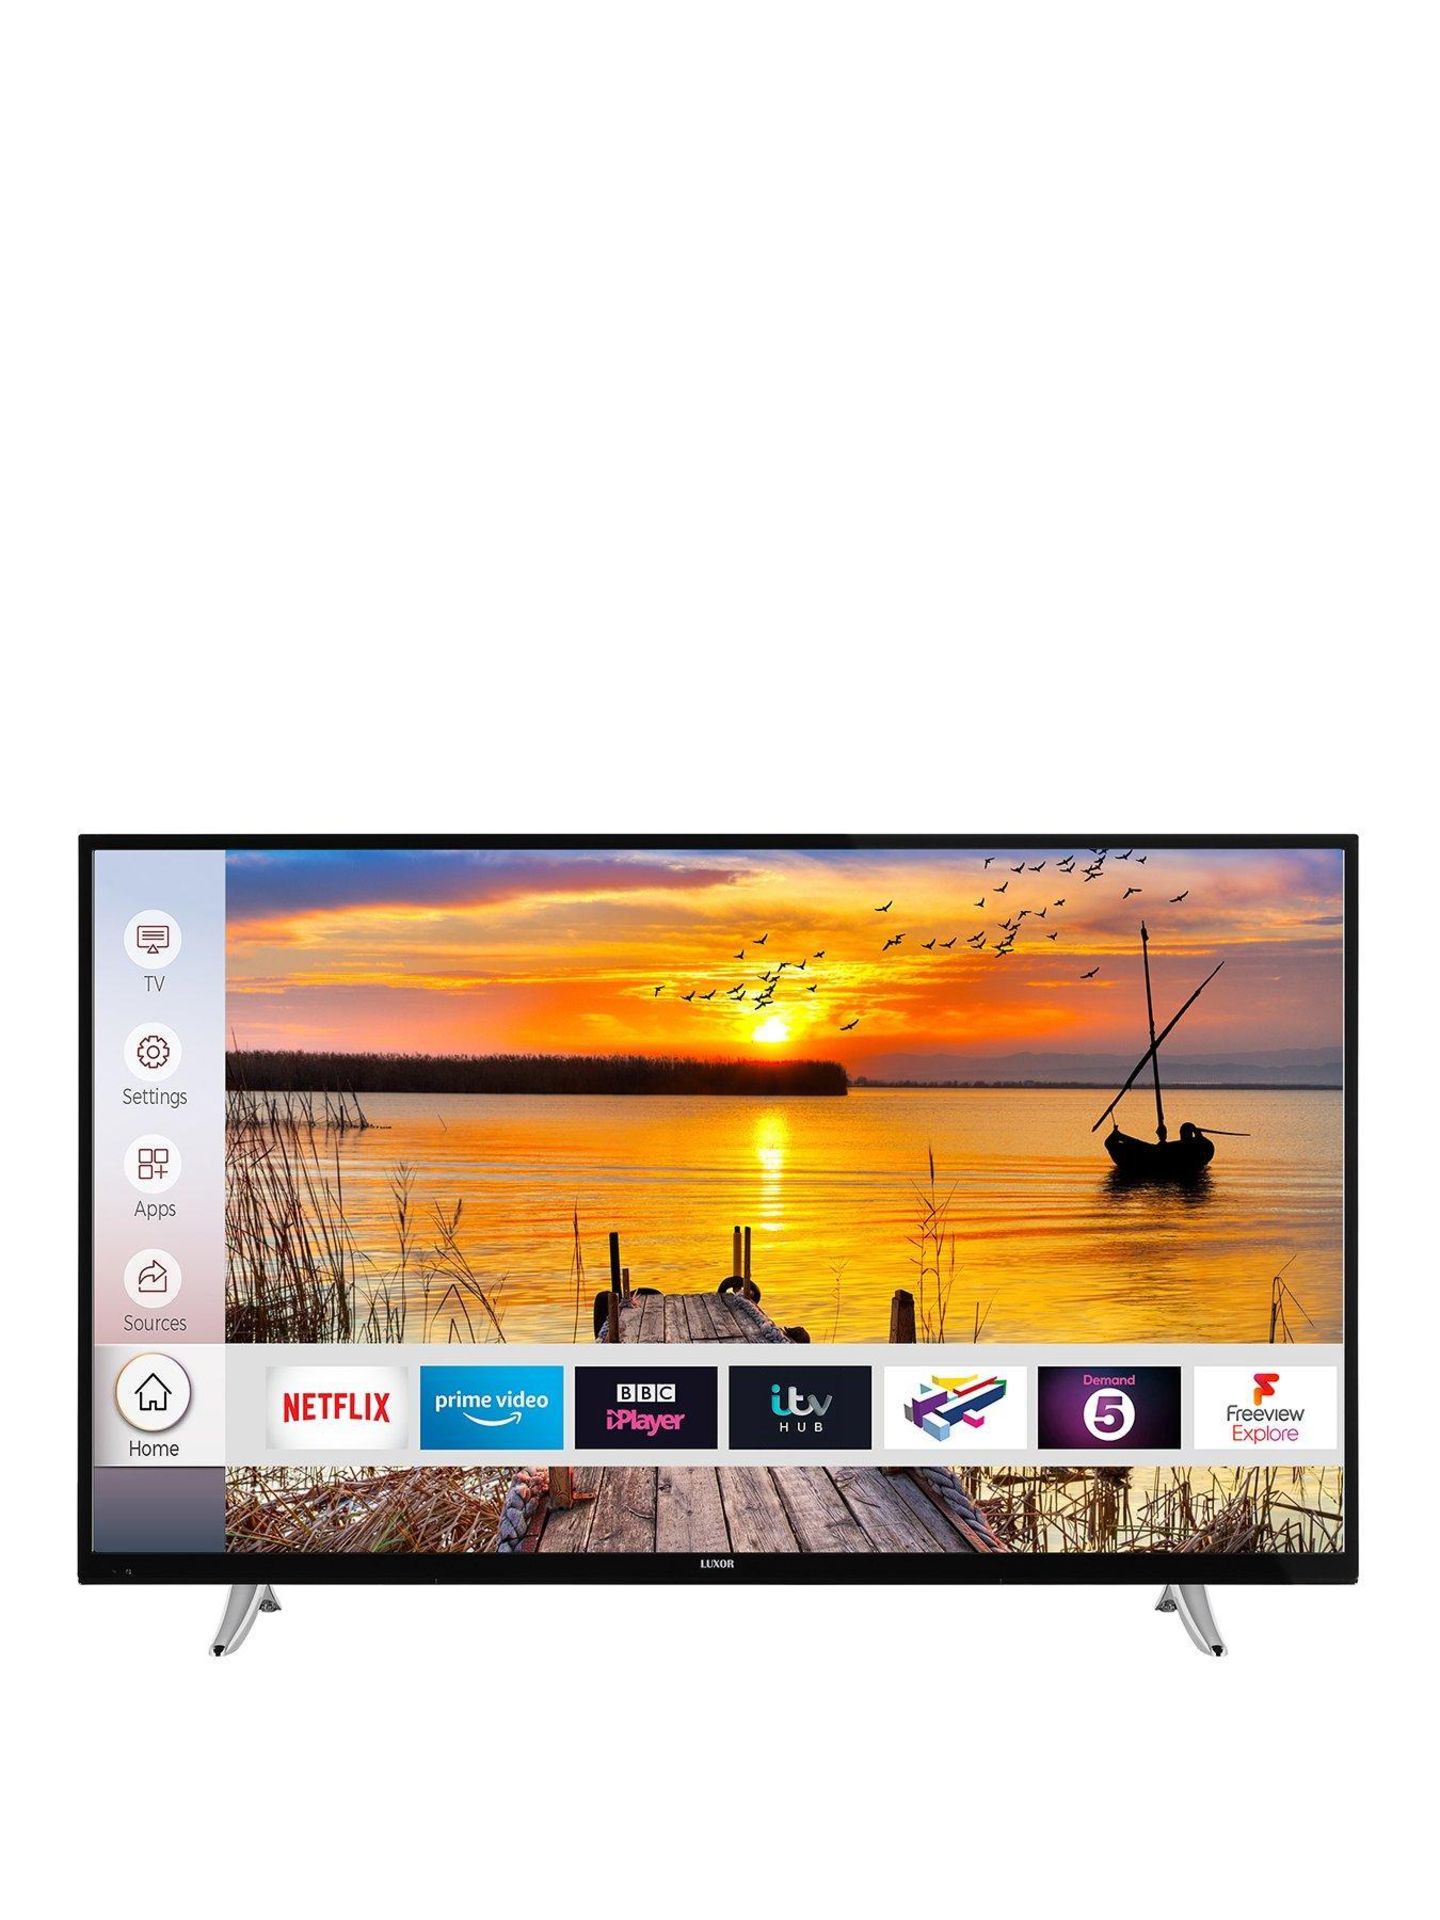 Luxor 55inch 4k uhd, freeview play, smart tv [black] 79x125x28cm rrp: £622.0 - Image 2 of 2